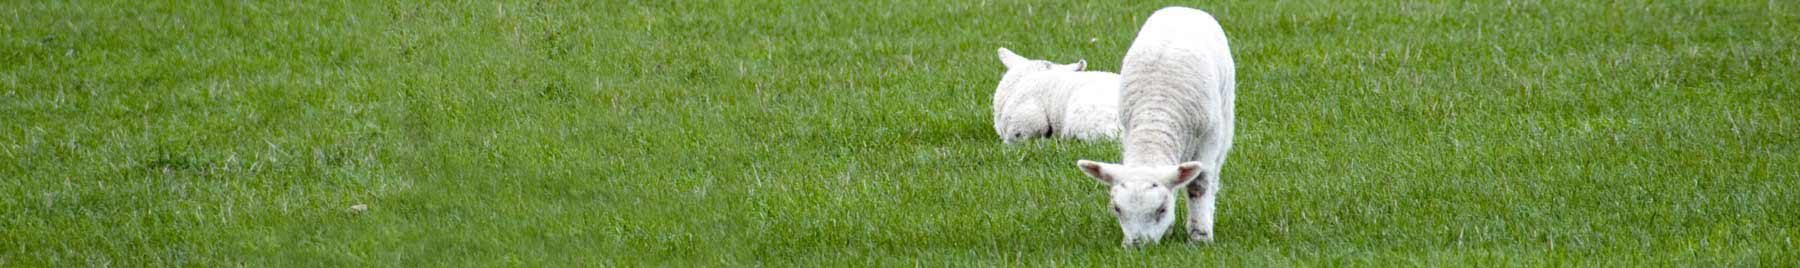 spring lambs in the grass